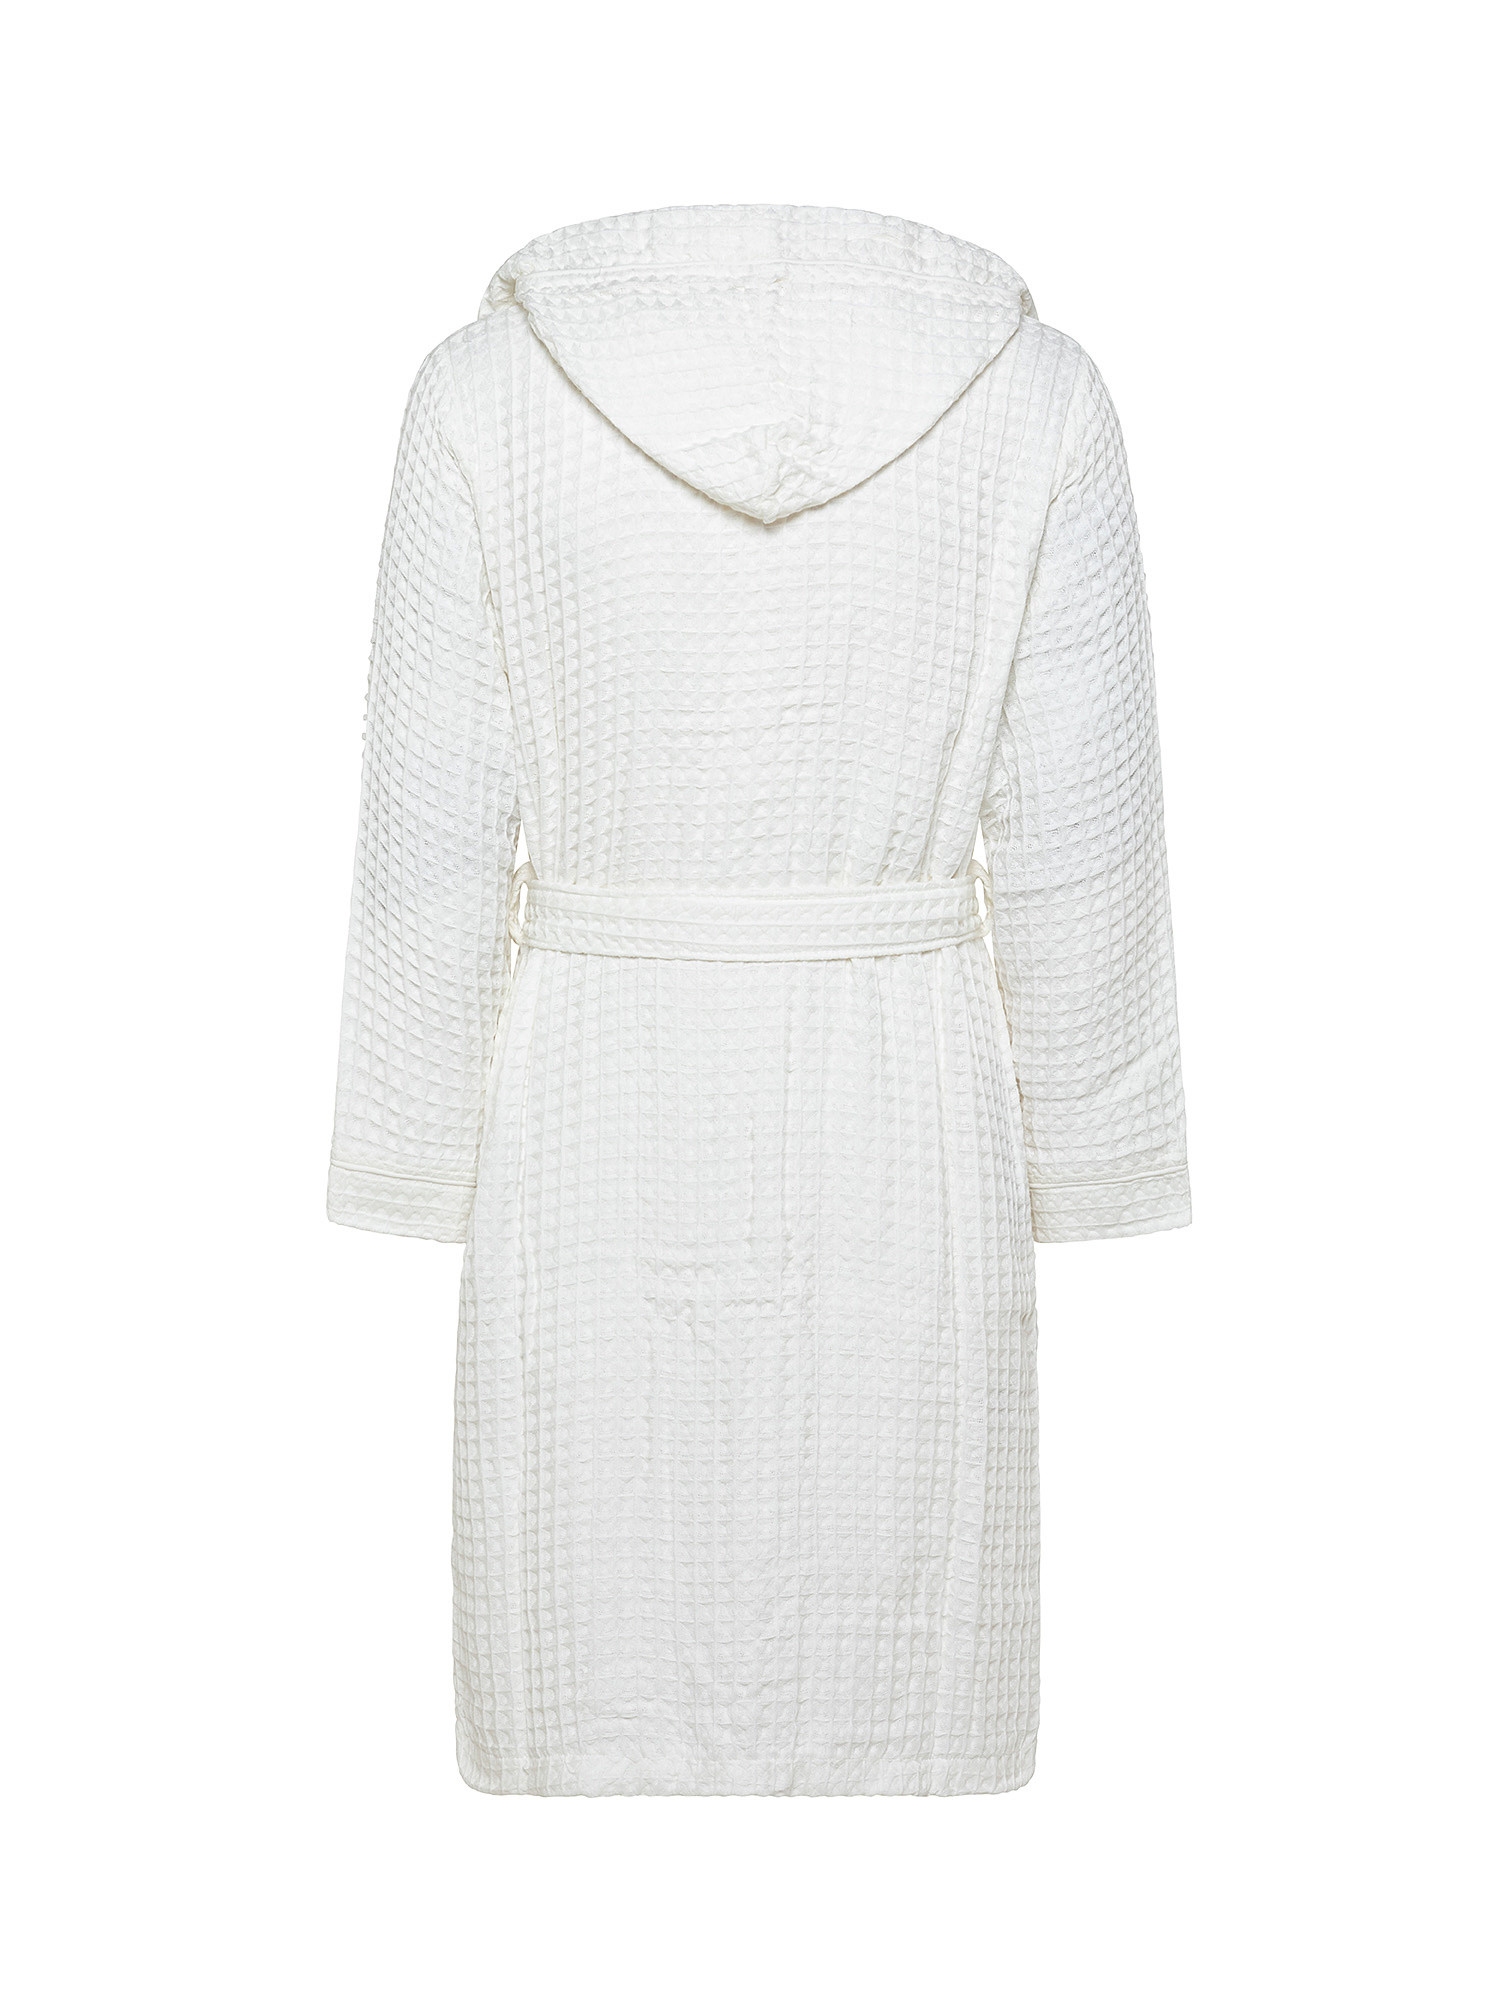 Solid color honeycomb cotton bathrobe, White, large image number 1